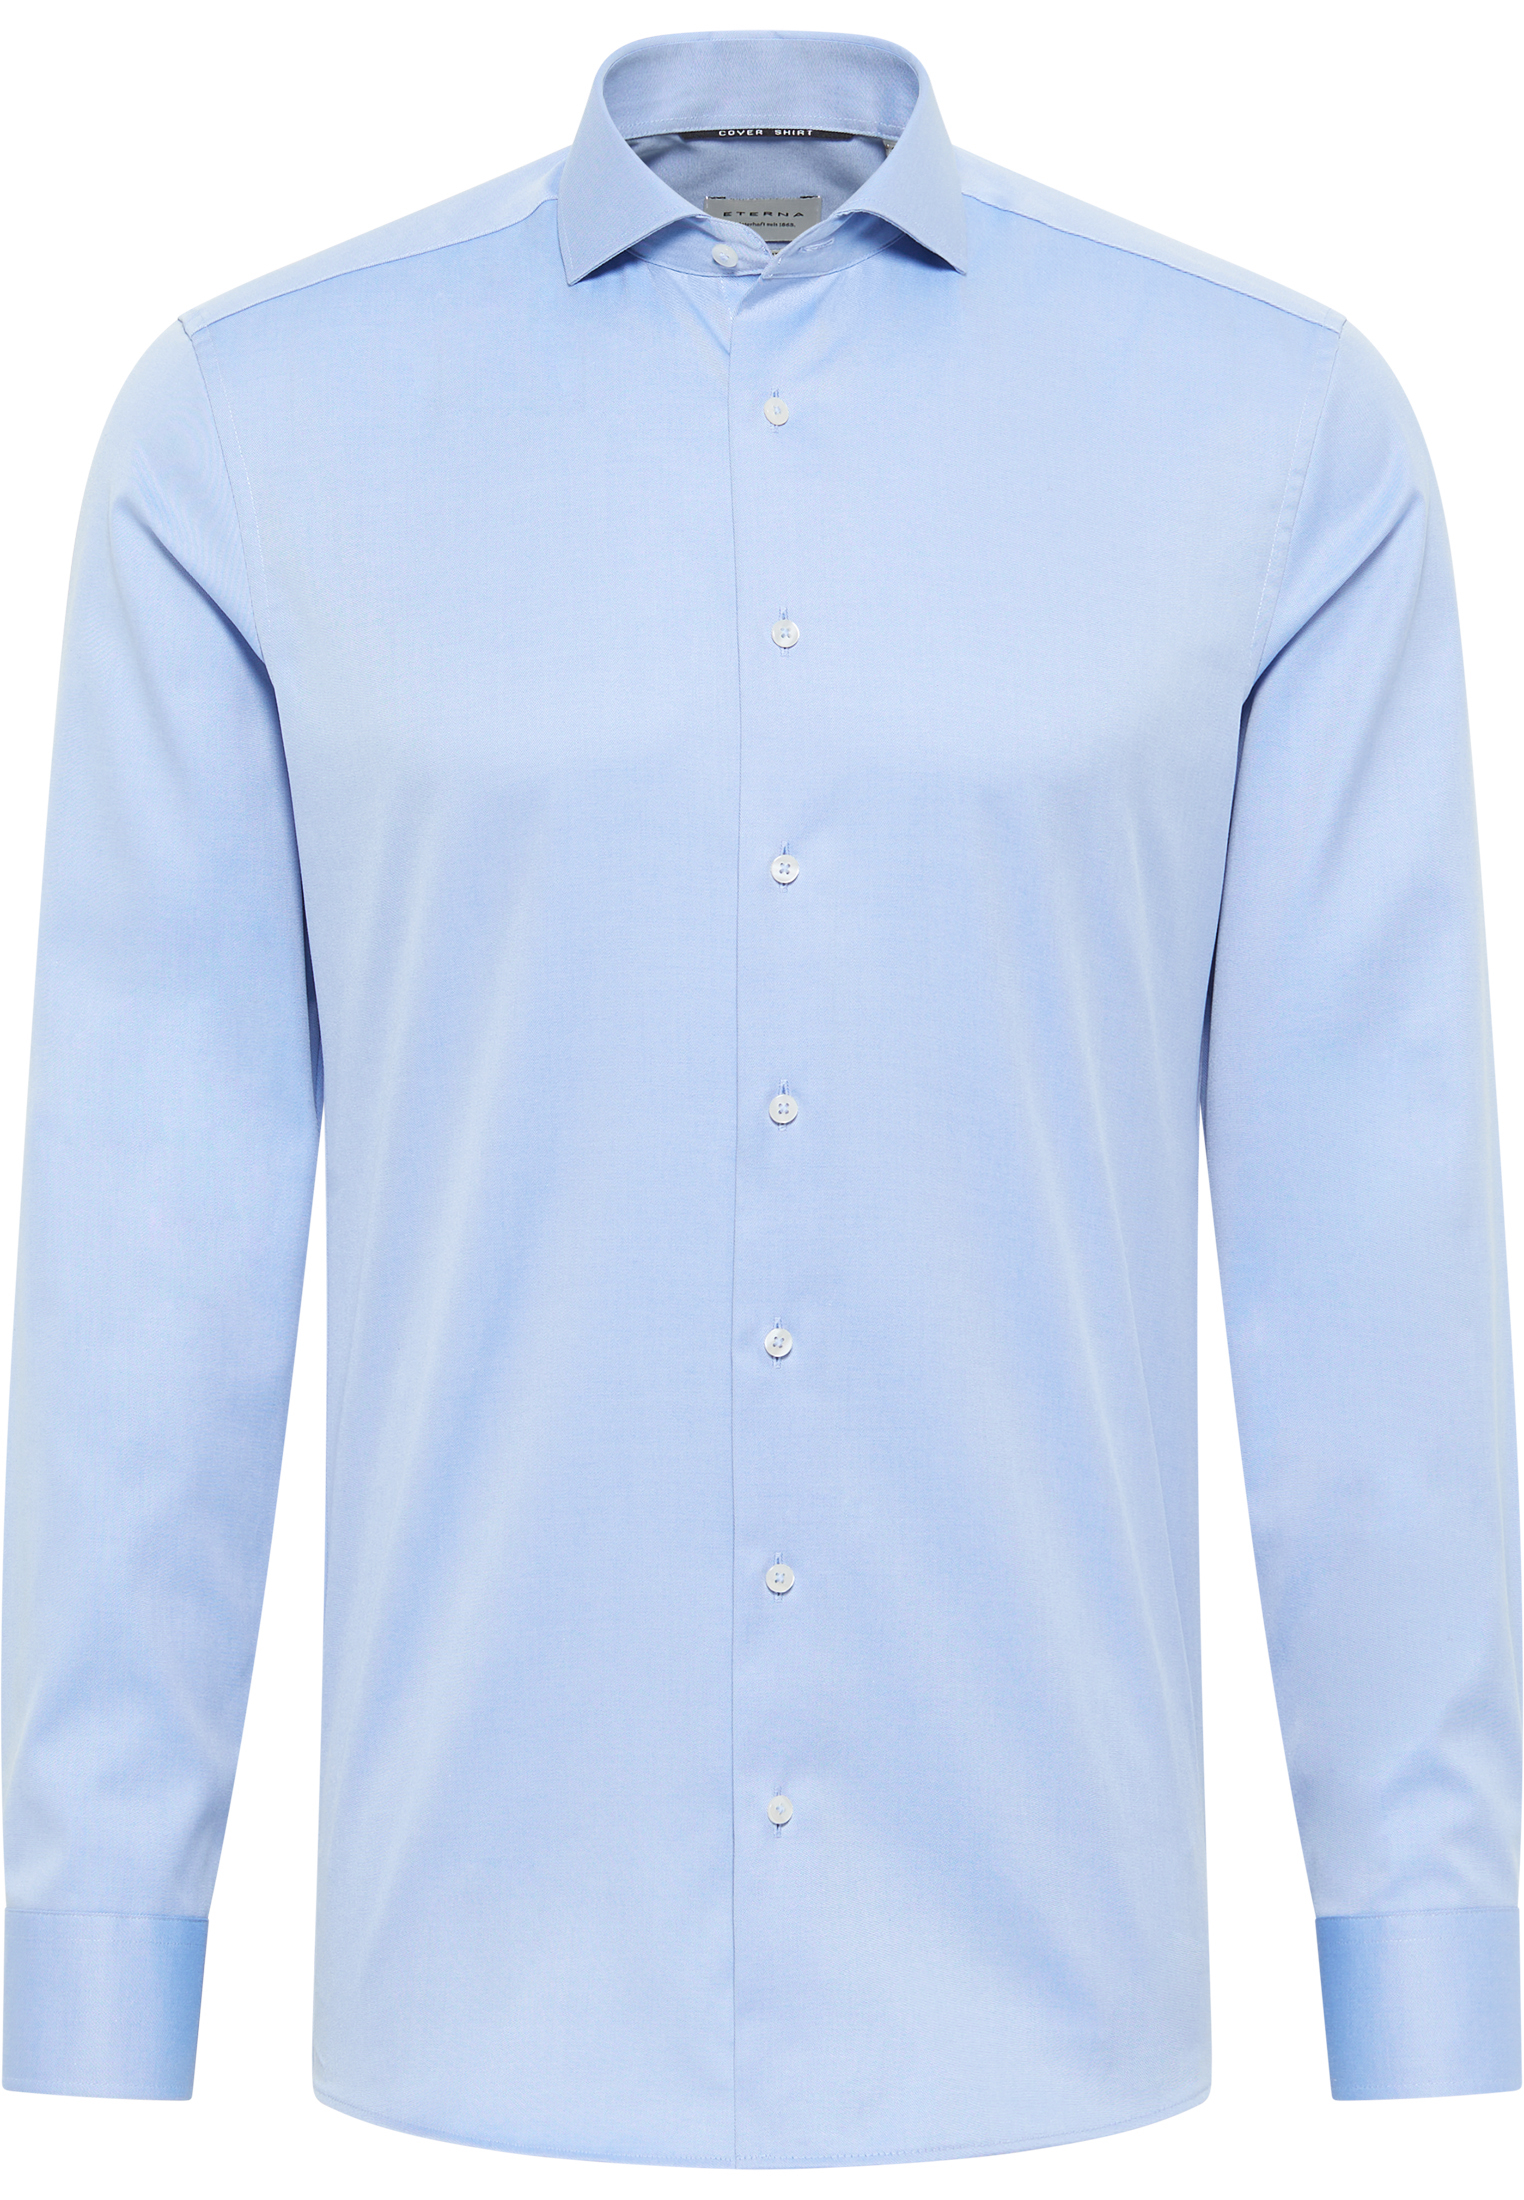 SLIM FIT Cover Shirt in blue plain